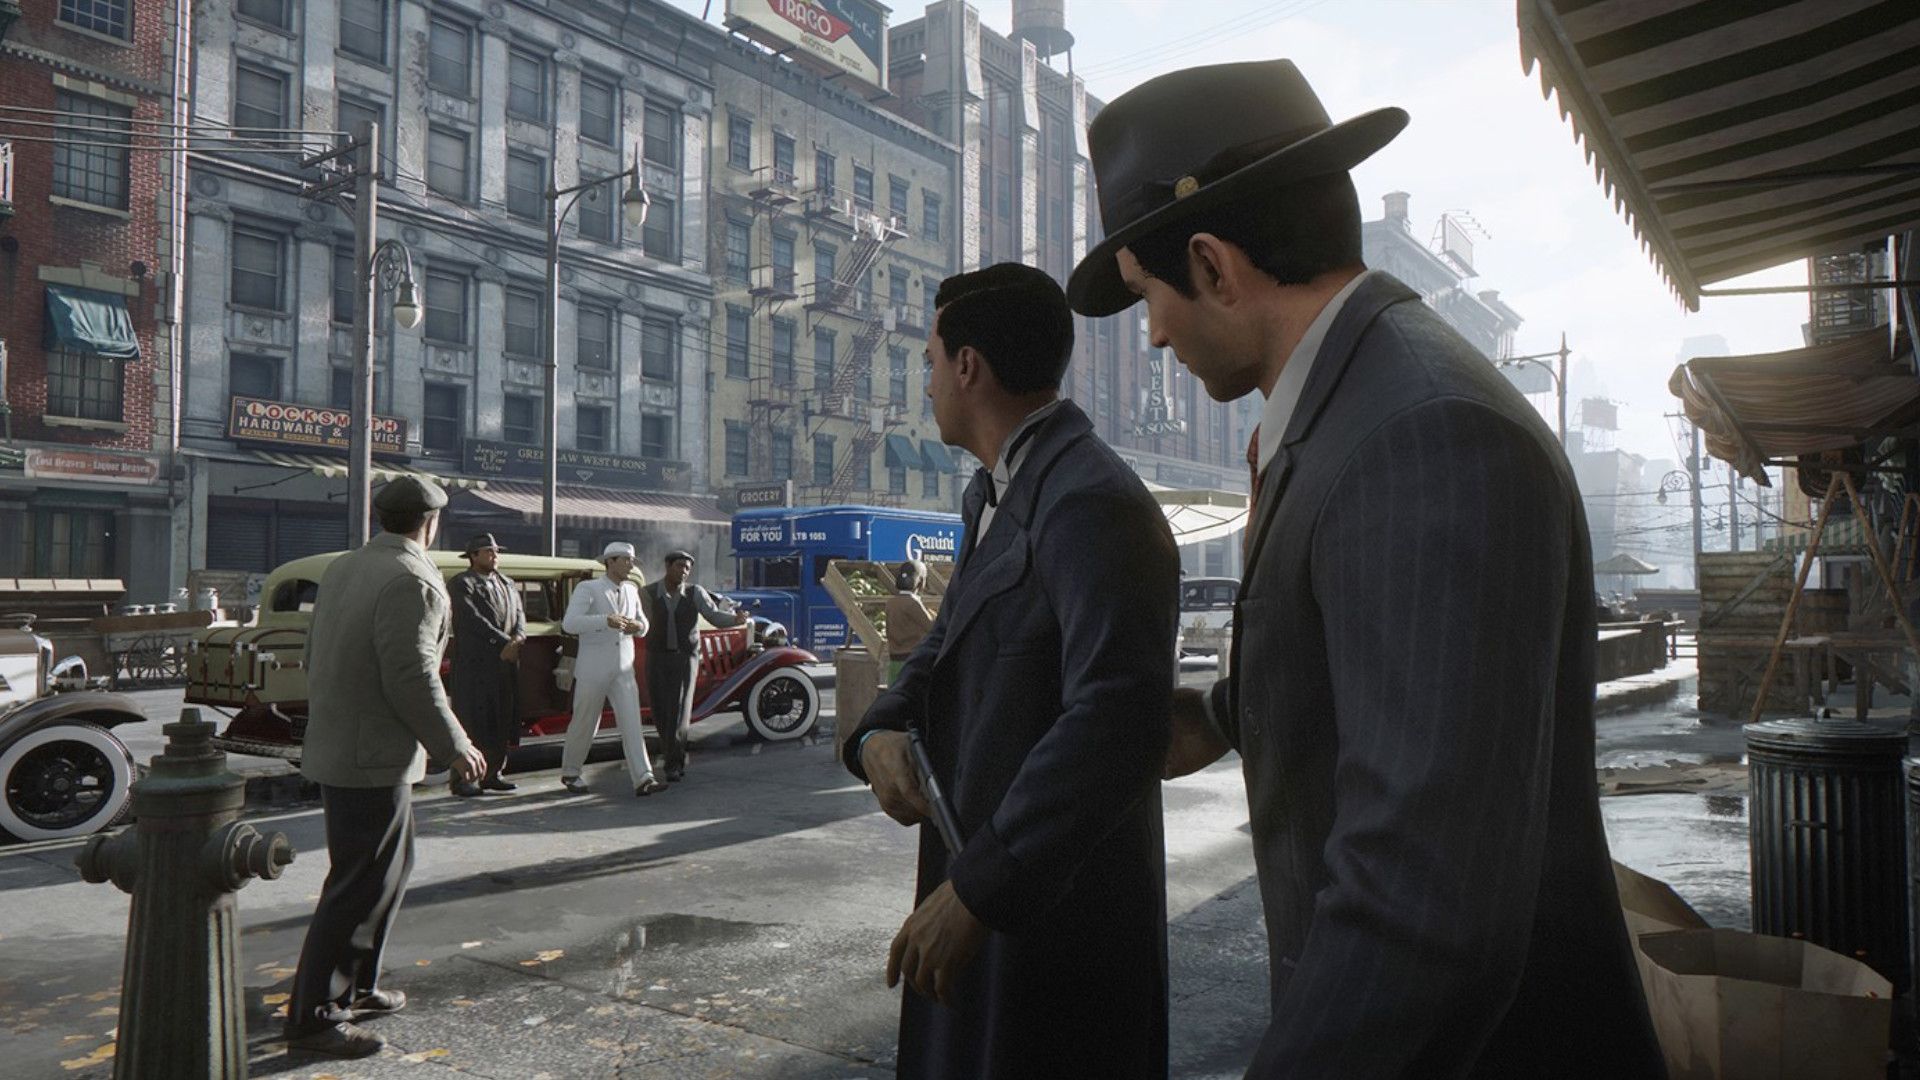 Mafia: Definitive Edition release date delayed a month, but here's ten seconds of gameplay